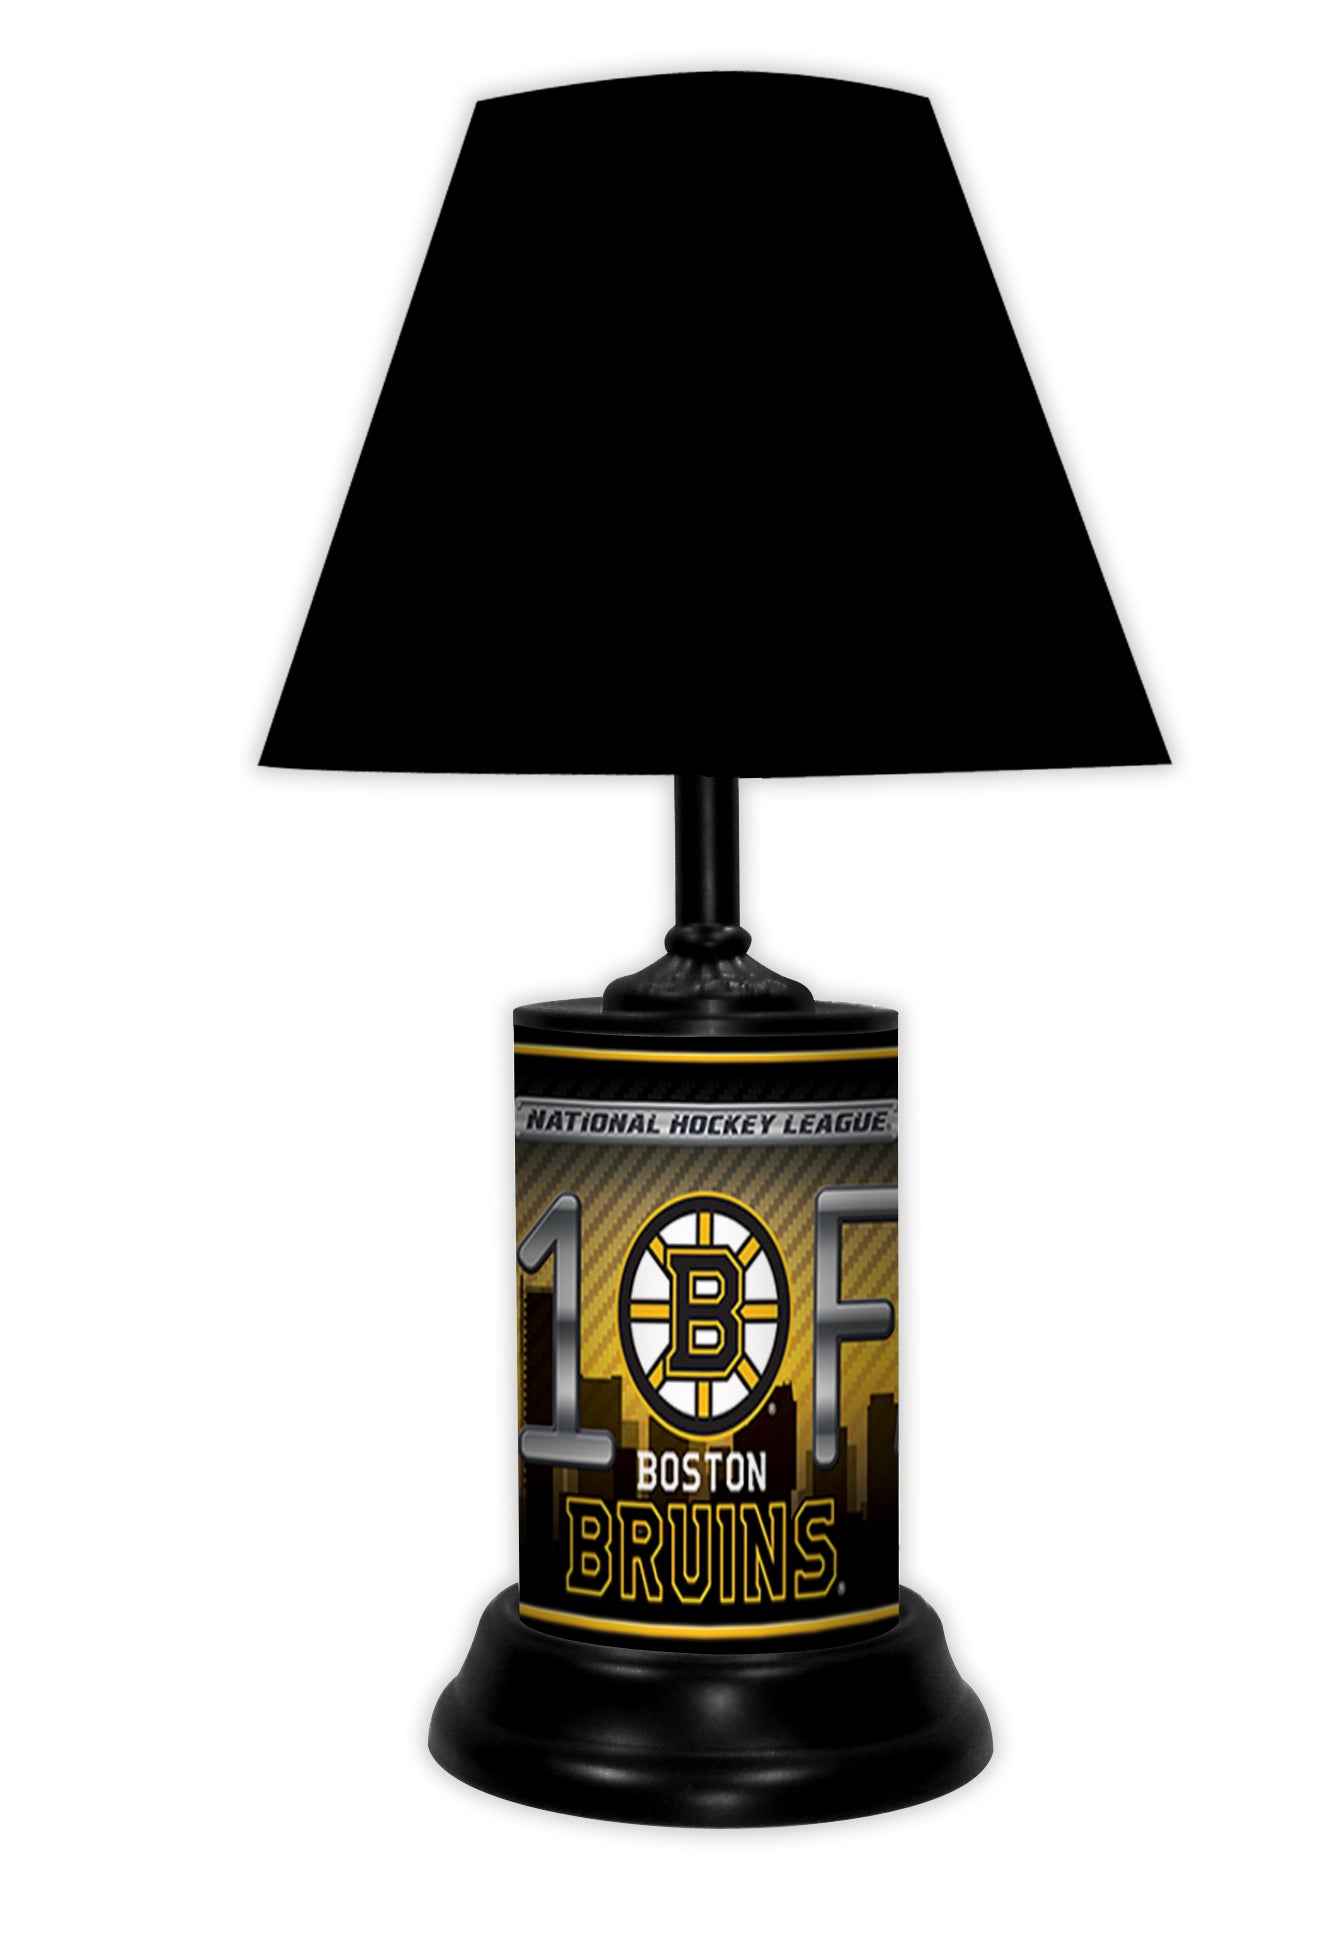 Boston Bruins tabletop lamp featuring team colors, logo and wording "#1 Fan" with black base and black shade